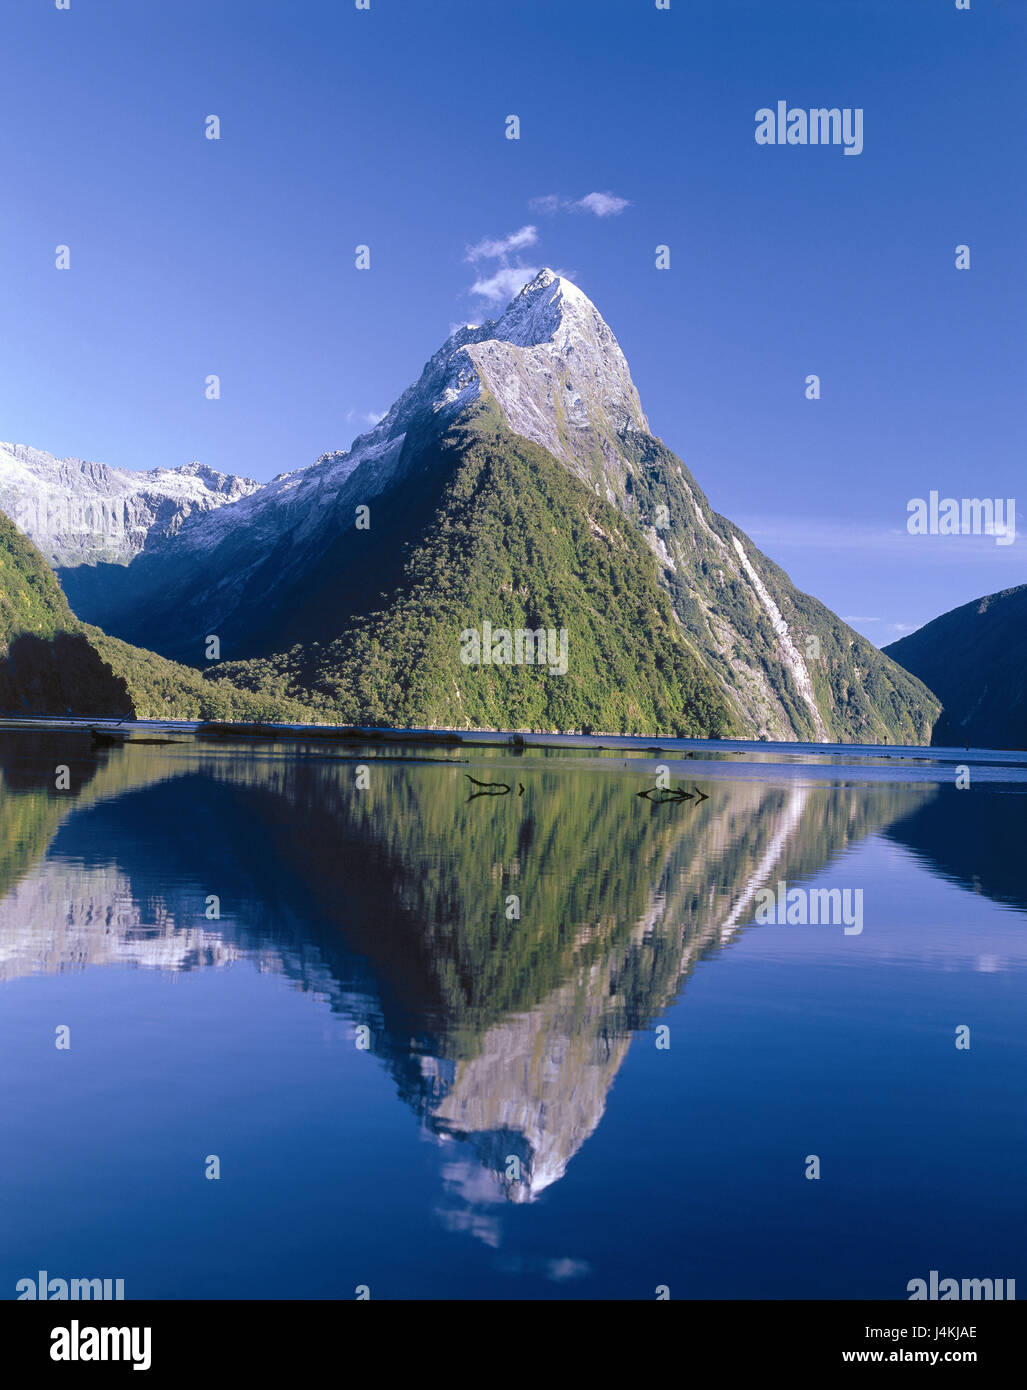 New Zealand, south island, fjord country national park, Mitre Peak New Zealand, mountain landscape, mountain, mountains, coast, fjord, water surface, mirroring, destination, place of interest, nature, rest, silence, Idyll Stock Photo